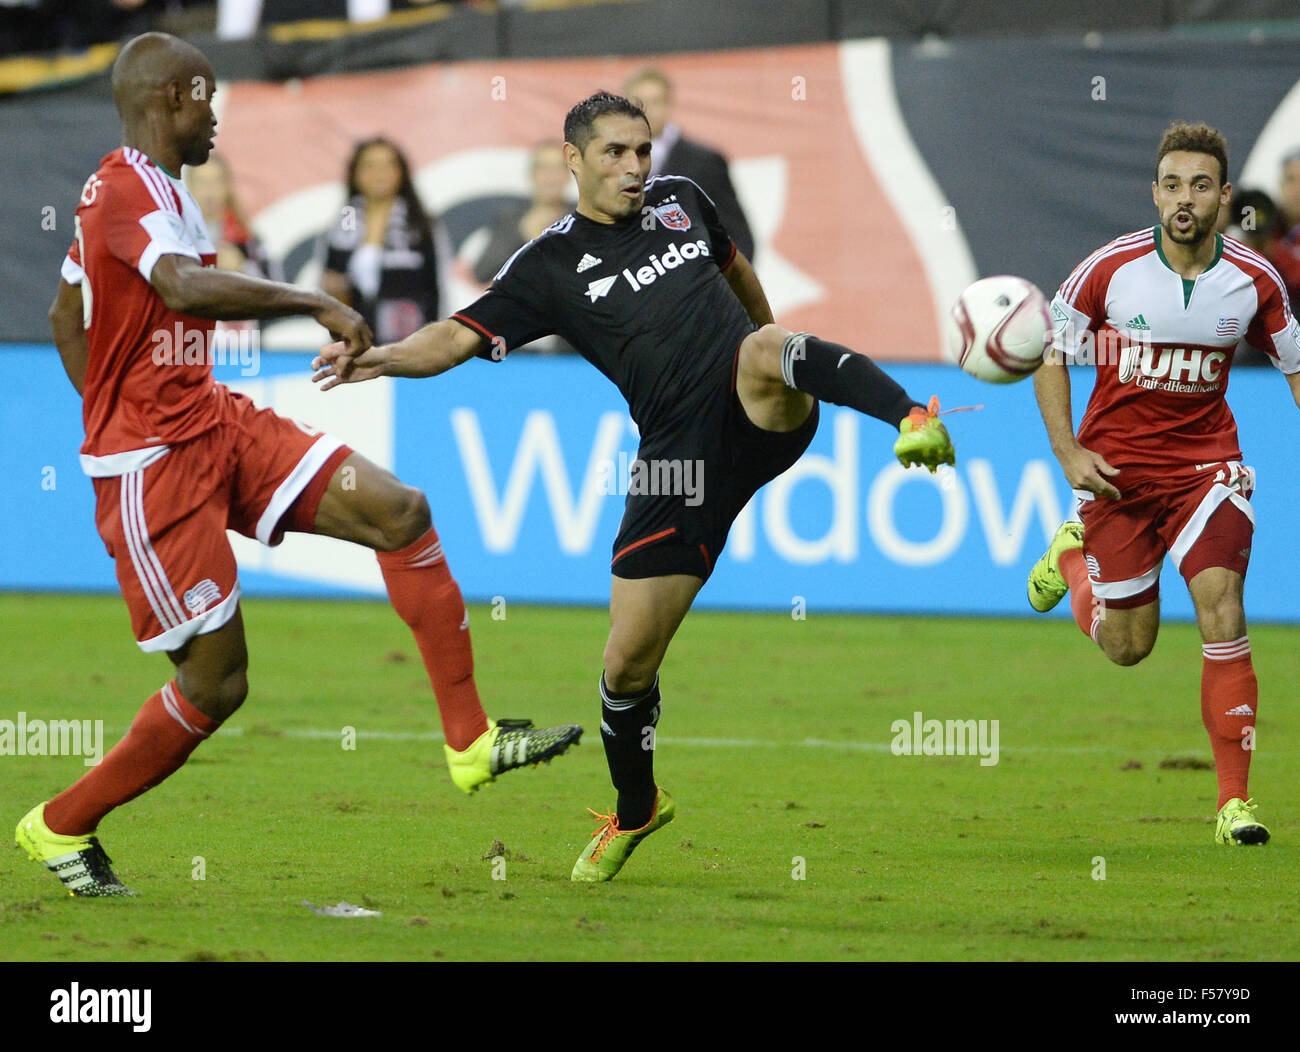 Washington, DC, USA. 28th Oct, 2015. 20151028 - D.C. United forward FABIAN ESPINDOLA (10) takes a shot with the outside of his left foot, between two New England Revolution players, in the second half at RFK Stadium in Washington. © Chuck Myers/ZUMA Wire/Alamy Live News Stock Photo